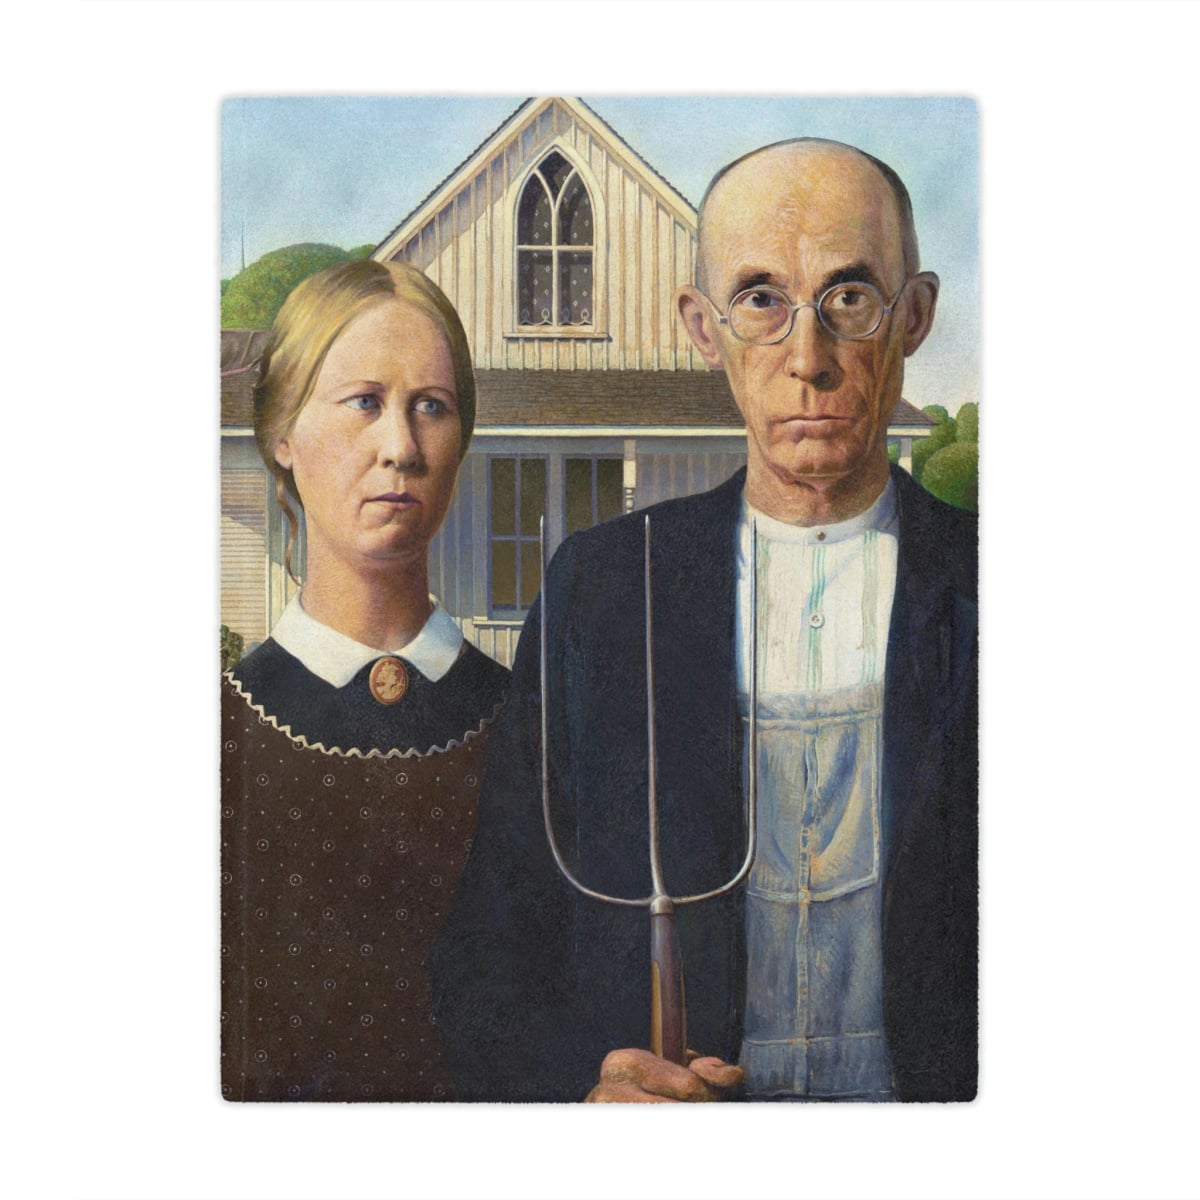 American Gothic Art Blanket: Iconic Grant Wood Painting Reproduction